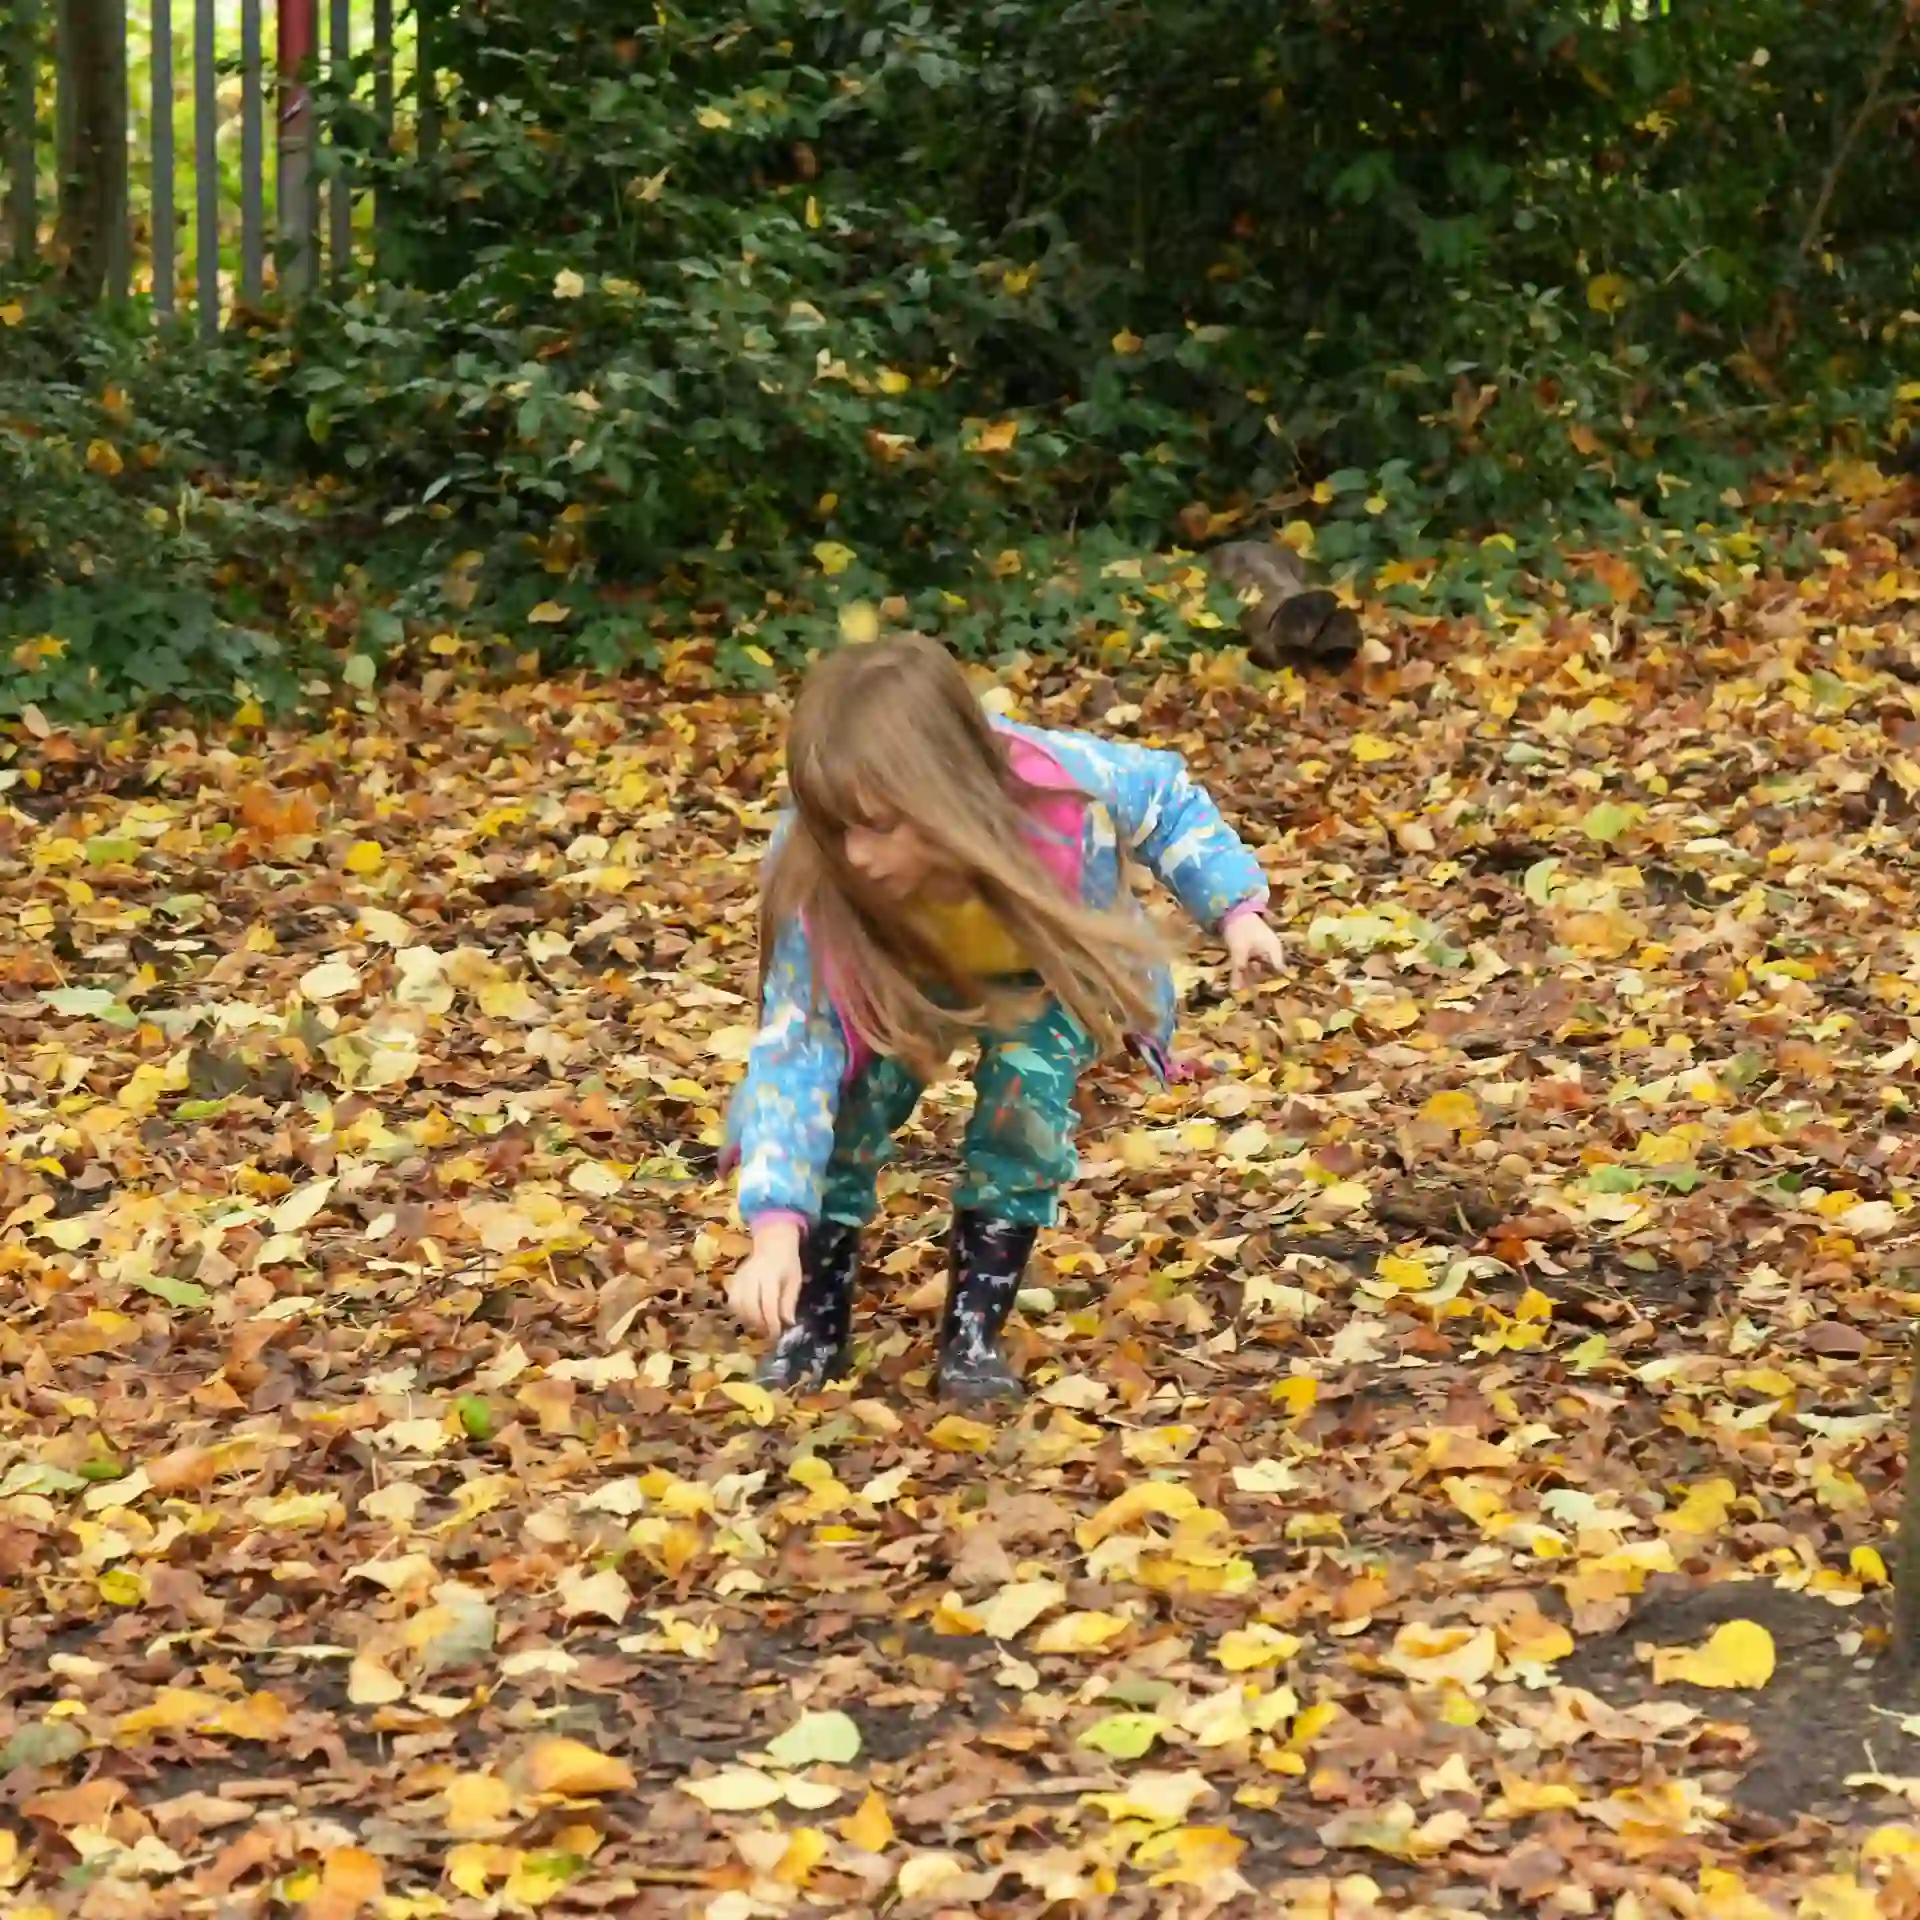 A girl stood outside searching through the leaves.